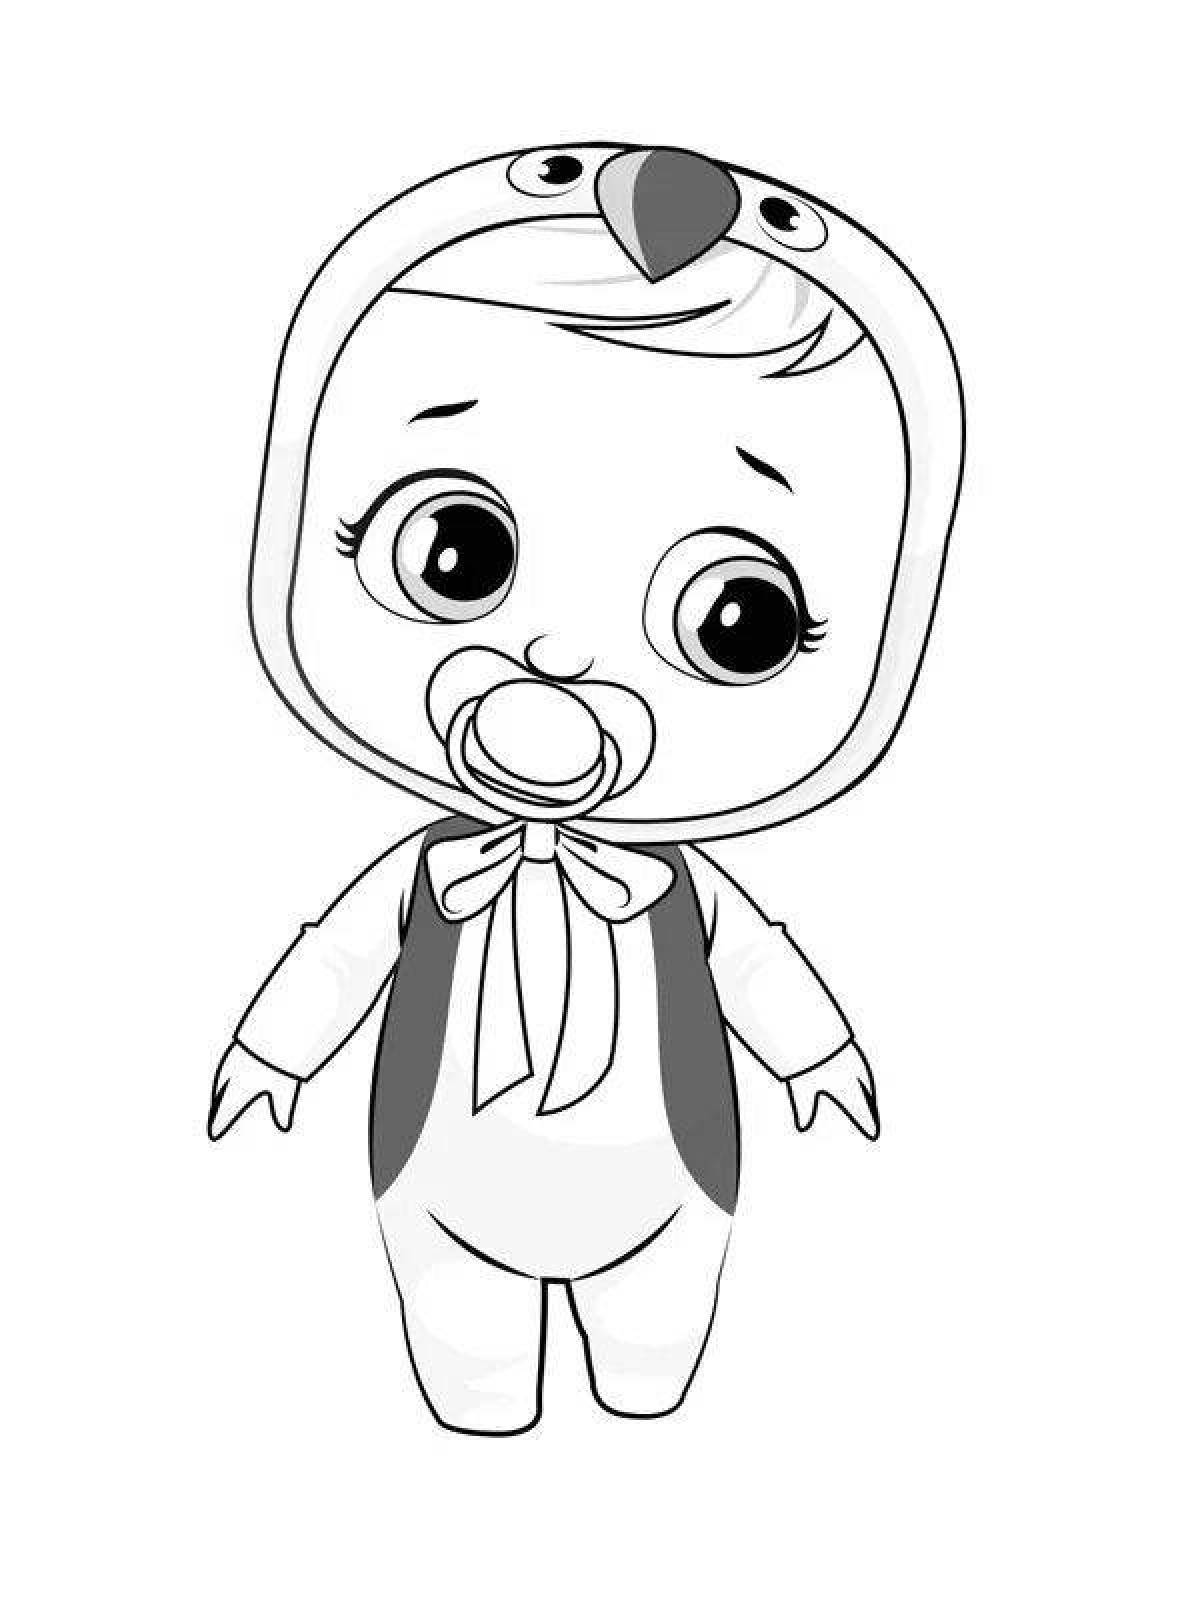 Blessed Charan baby coloring page